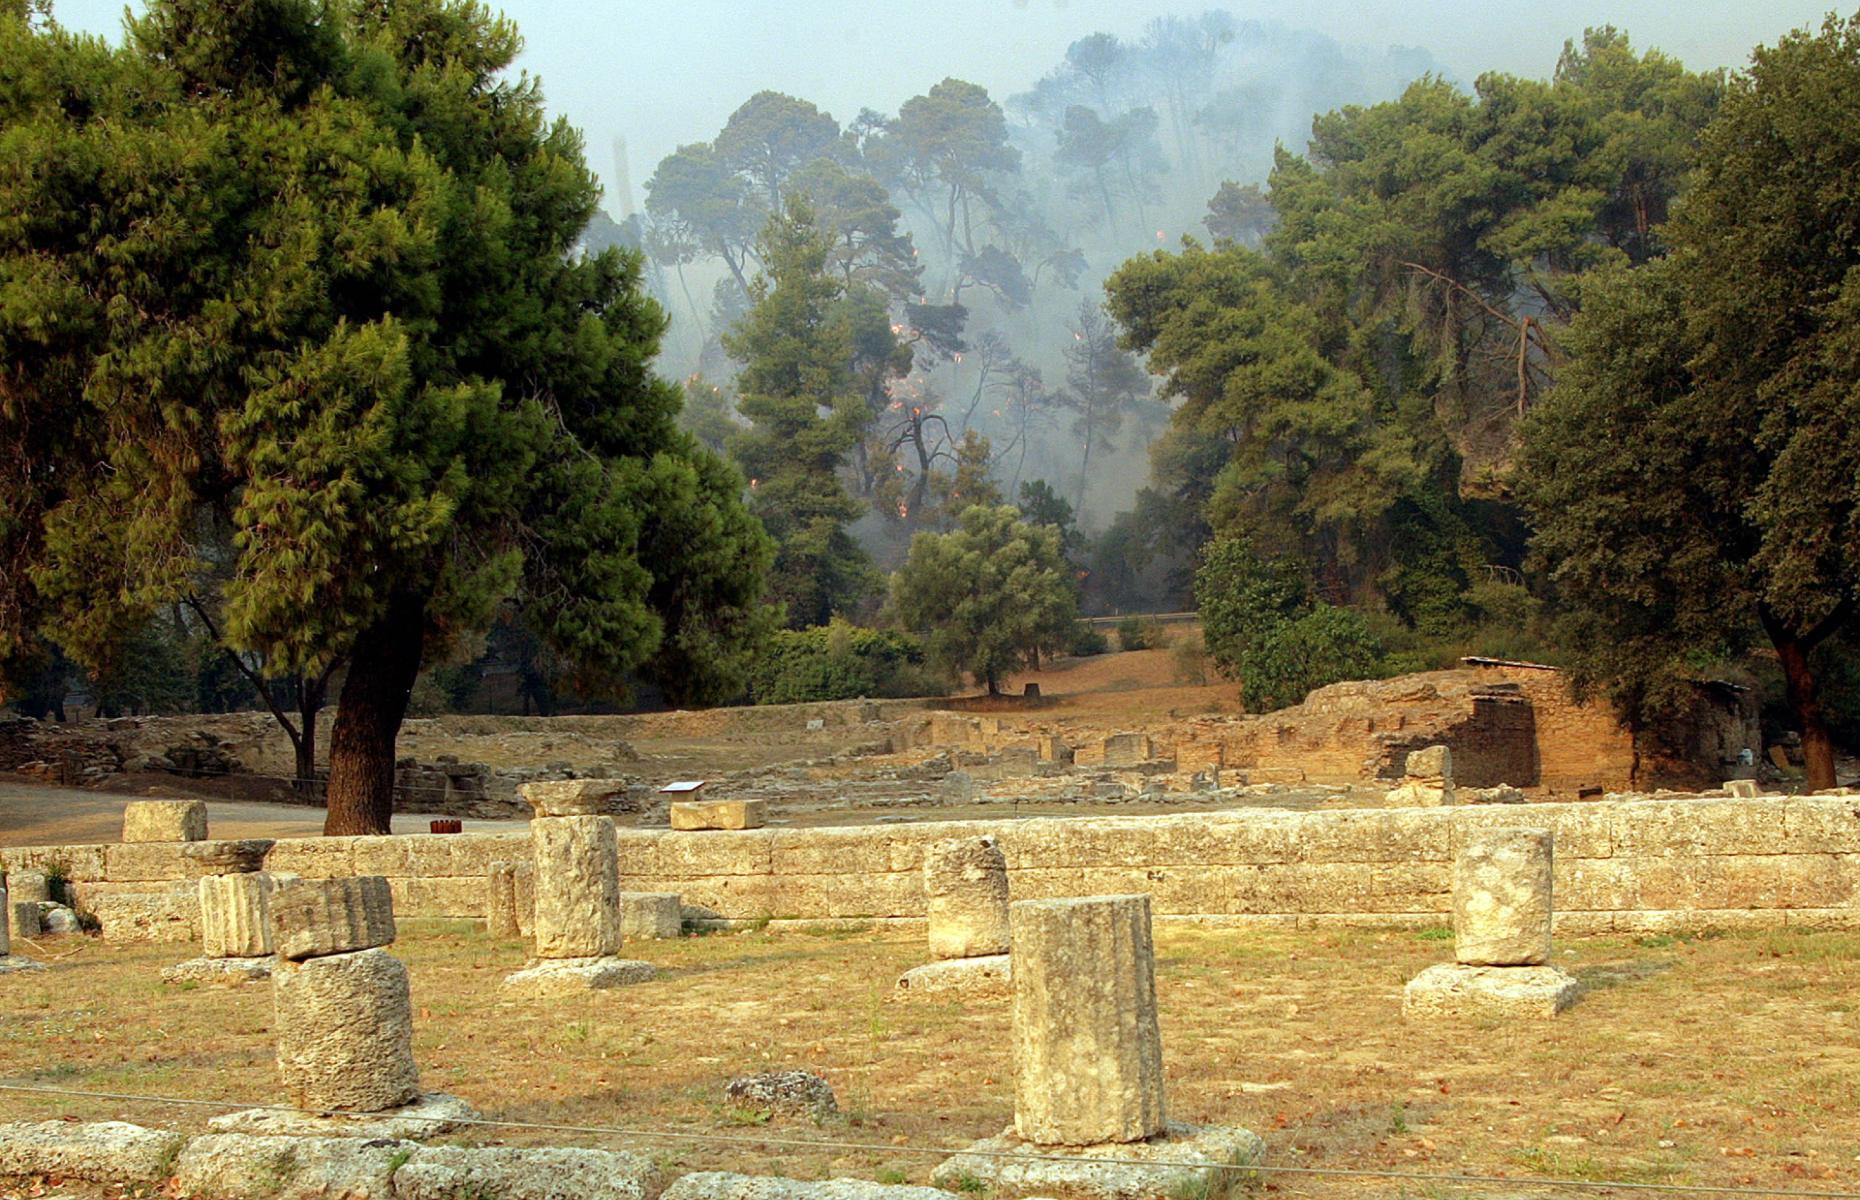 <p>Greece is packed with ancient cultural monuments, swarmed by tourists year-round. In recent years, climate change has become a growing threat to these historic landmarks. In July 2021 Olympia, the site of the first Olympic Games, was put at risk by raging wildfires that lasted for weeks. Firefighters had to stop the fires from reaching the ancient town more than once.</p>